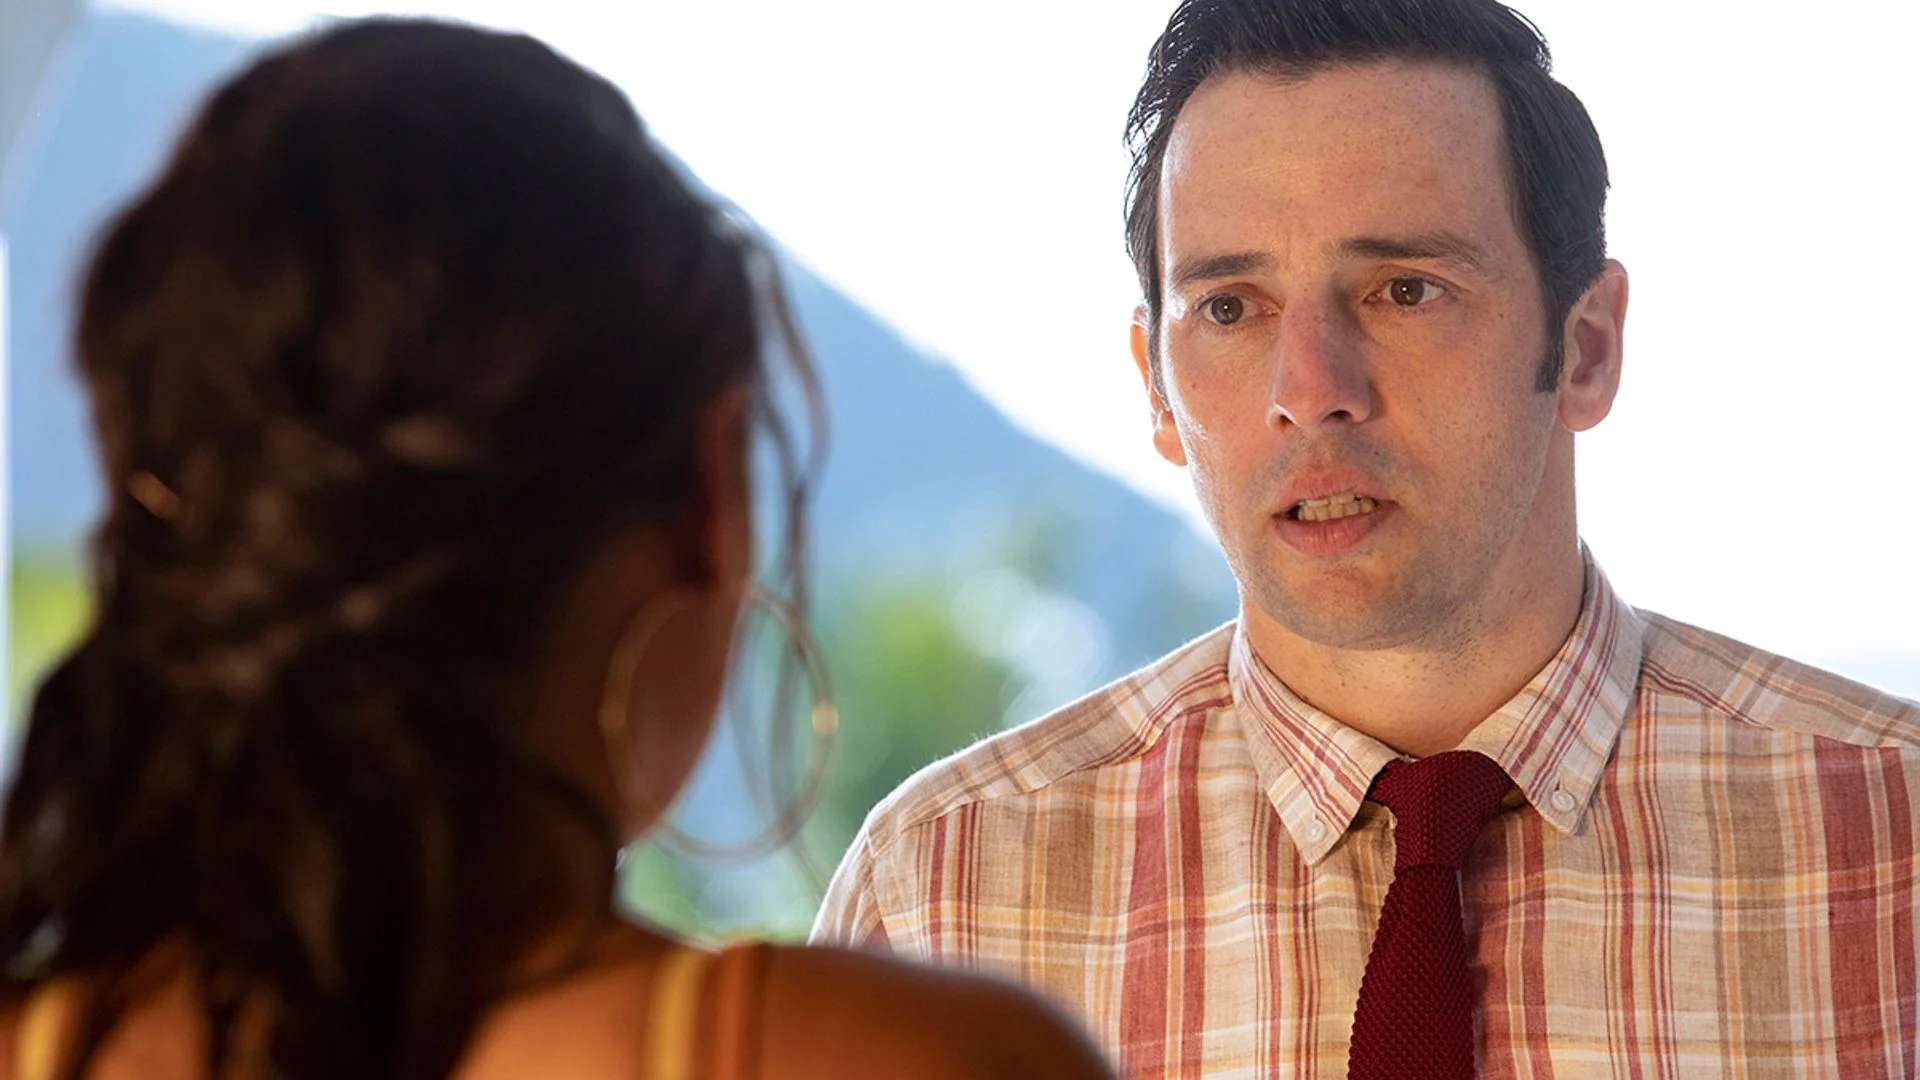 Death In Paradise Season 11 - Neville with a suspect